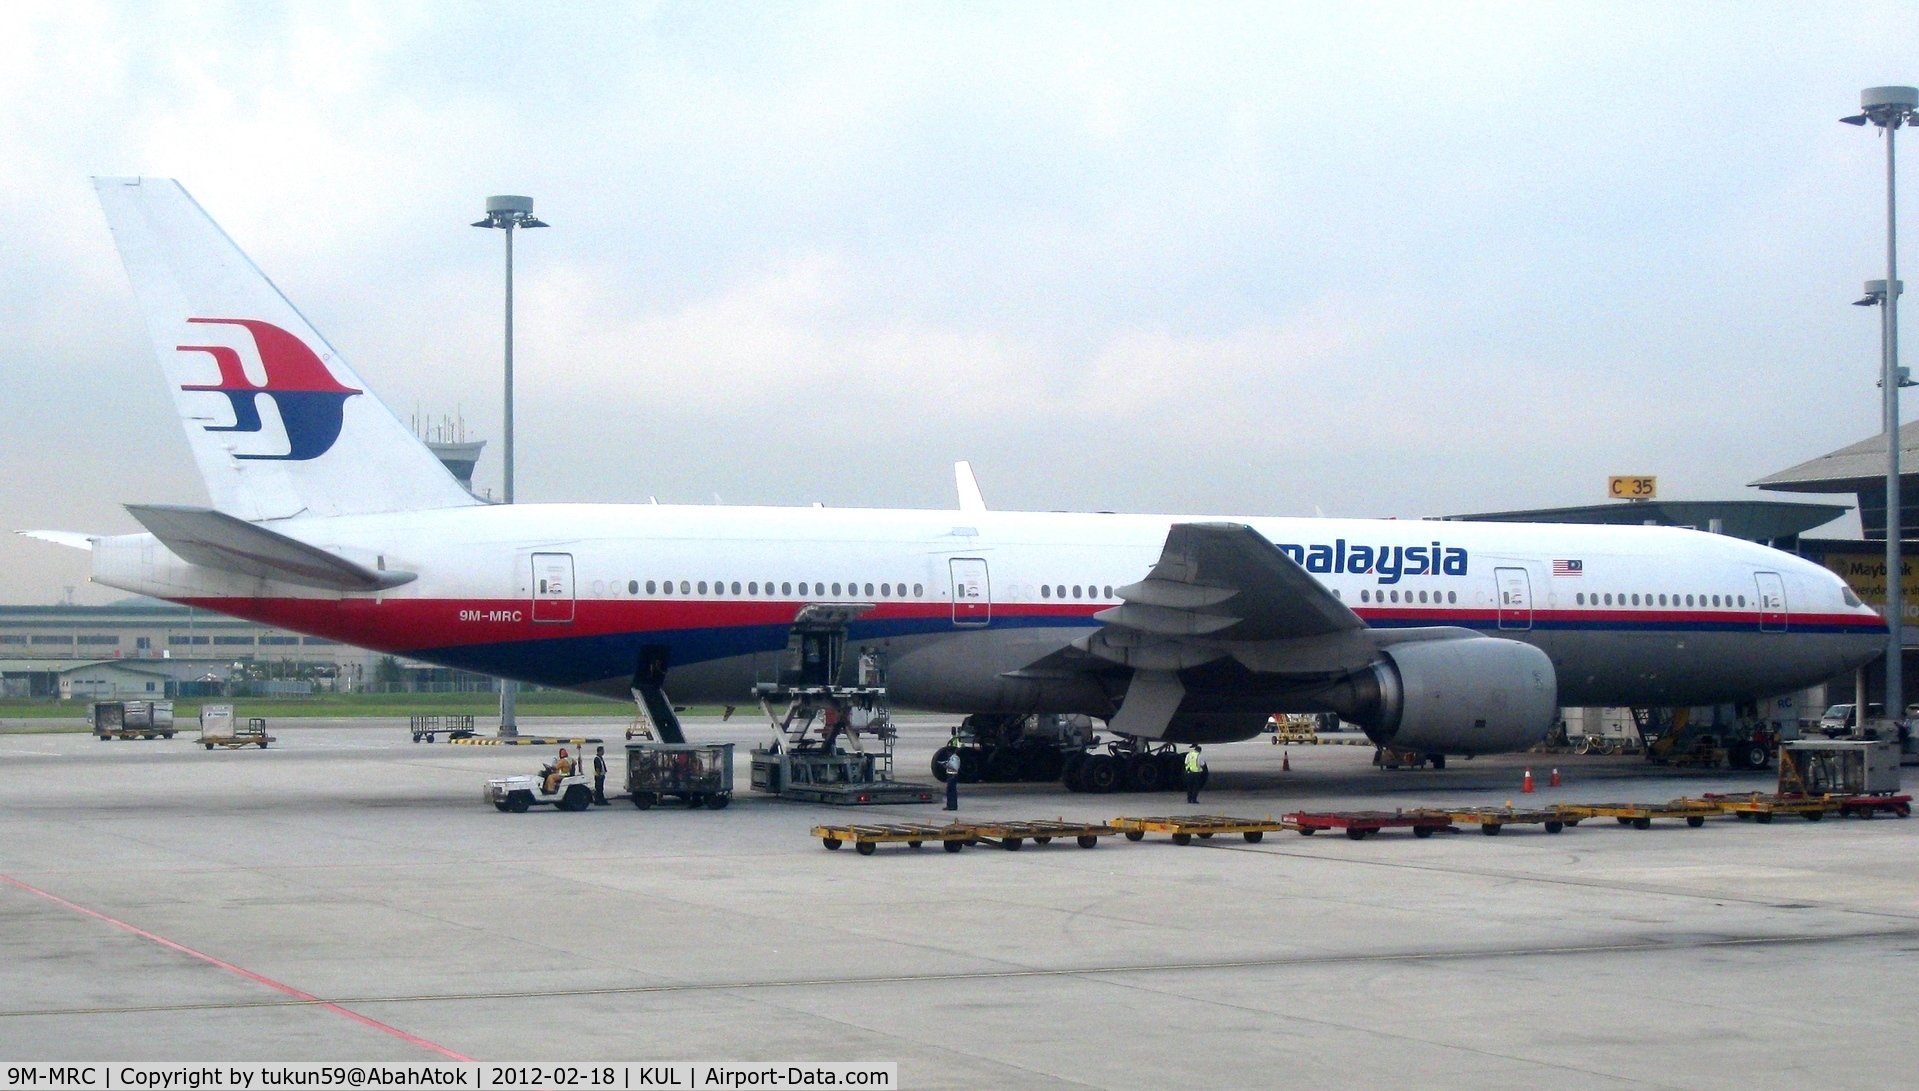 9M-MRC, 1997 Boeing 777-2H6/ER C/N 28410, Malaysia Airlines